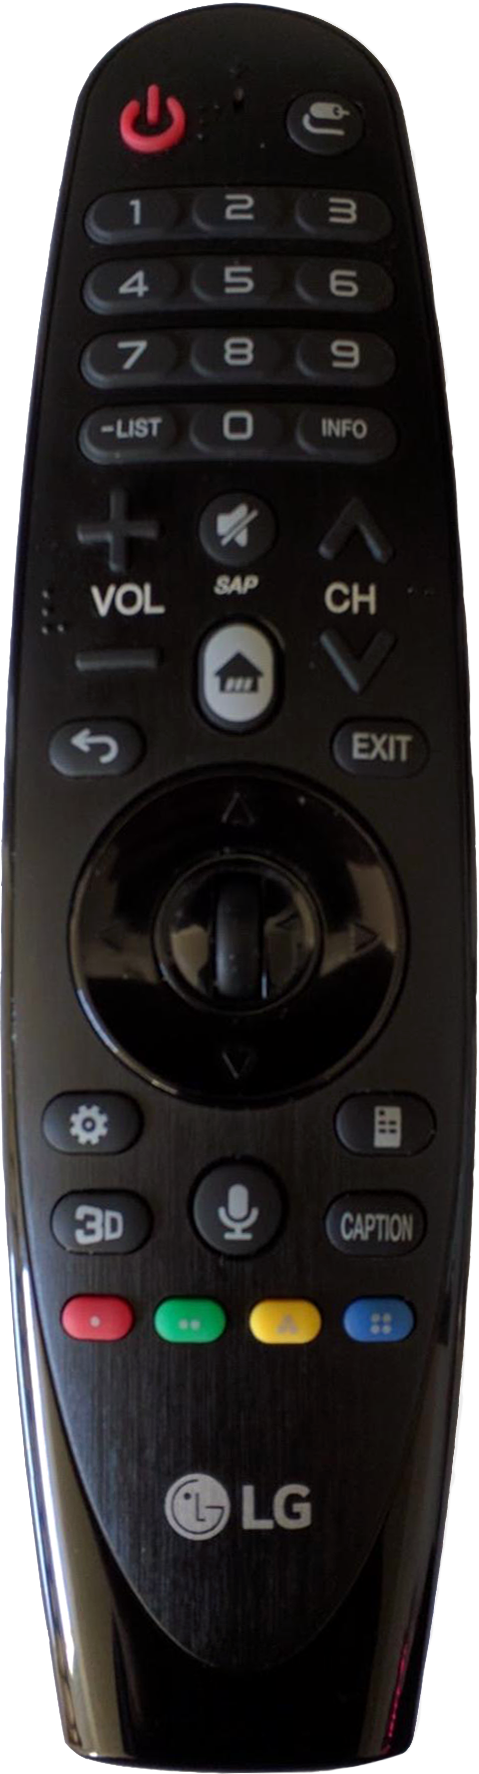 LG-remote.png